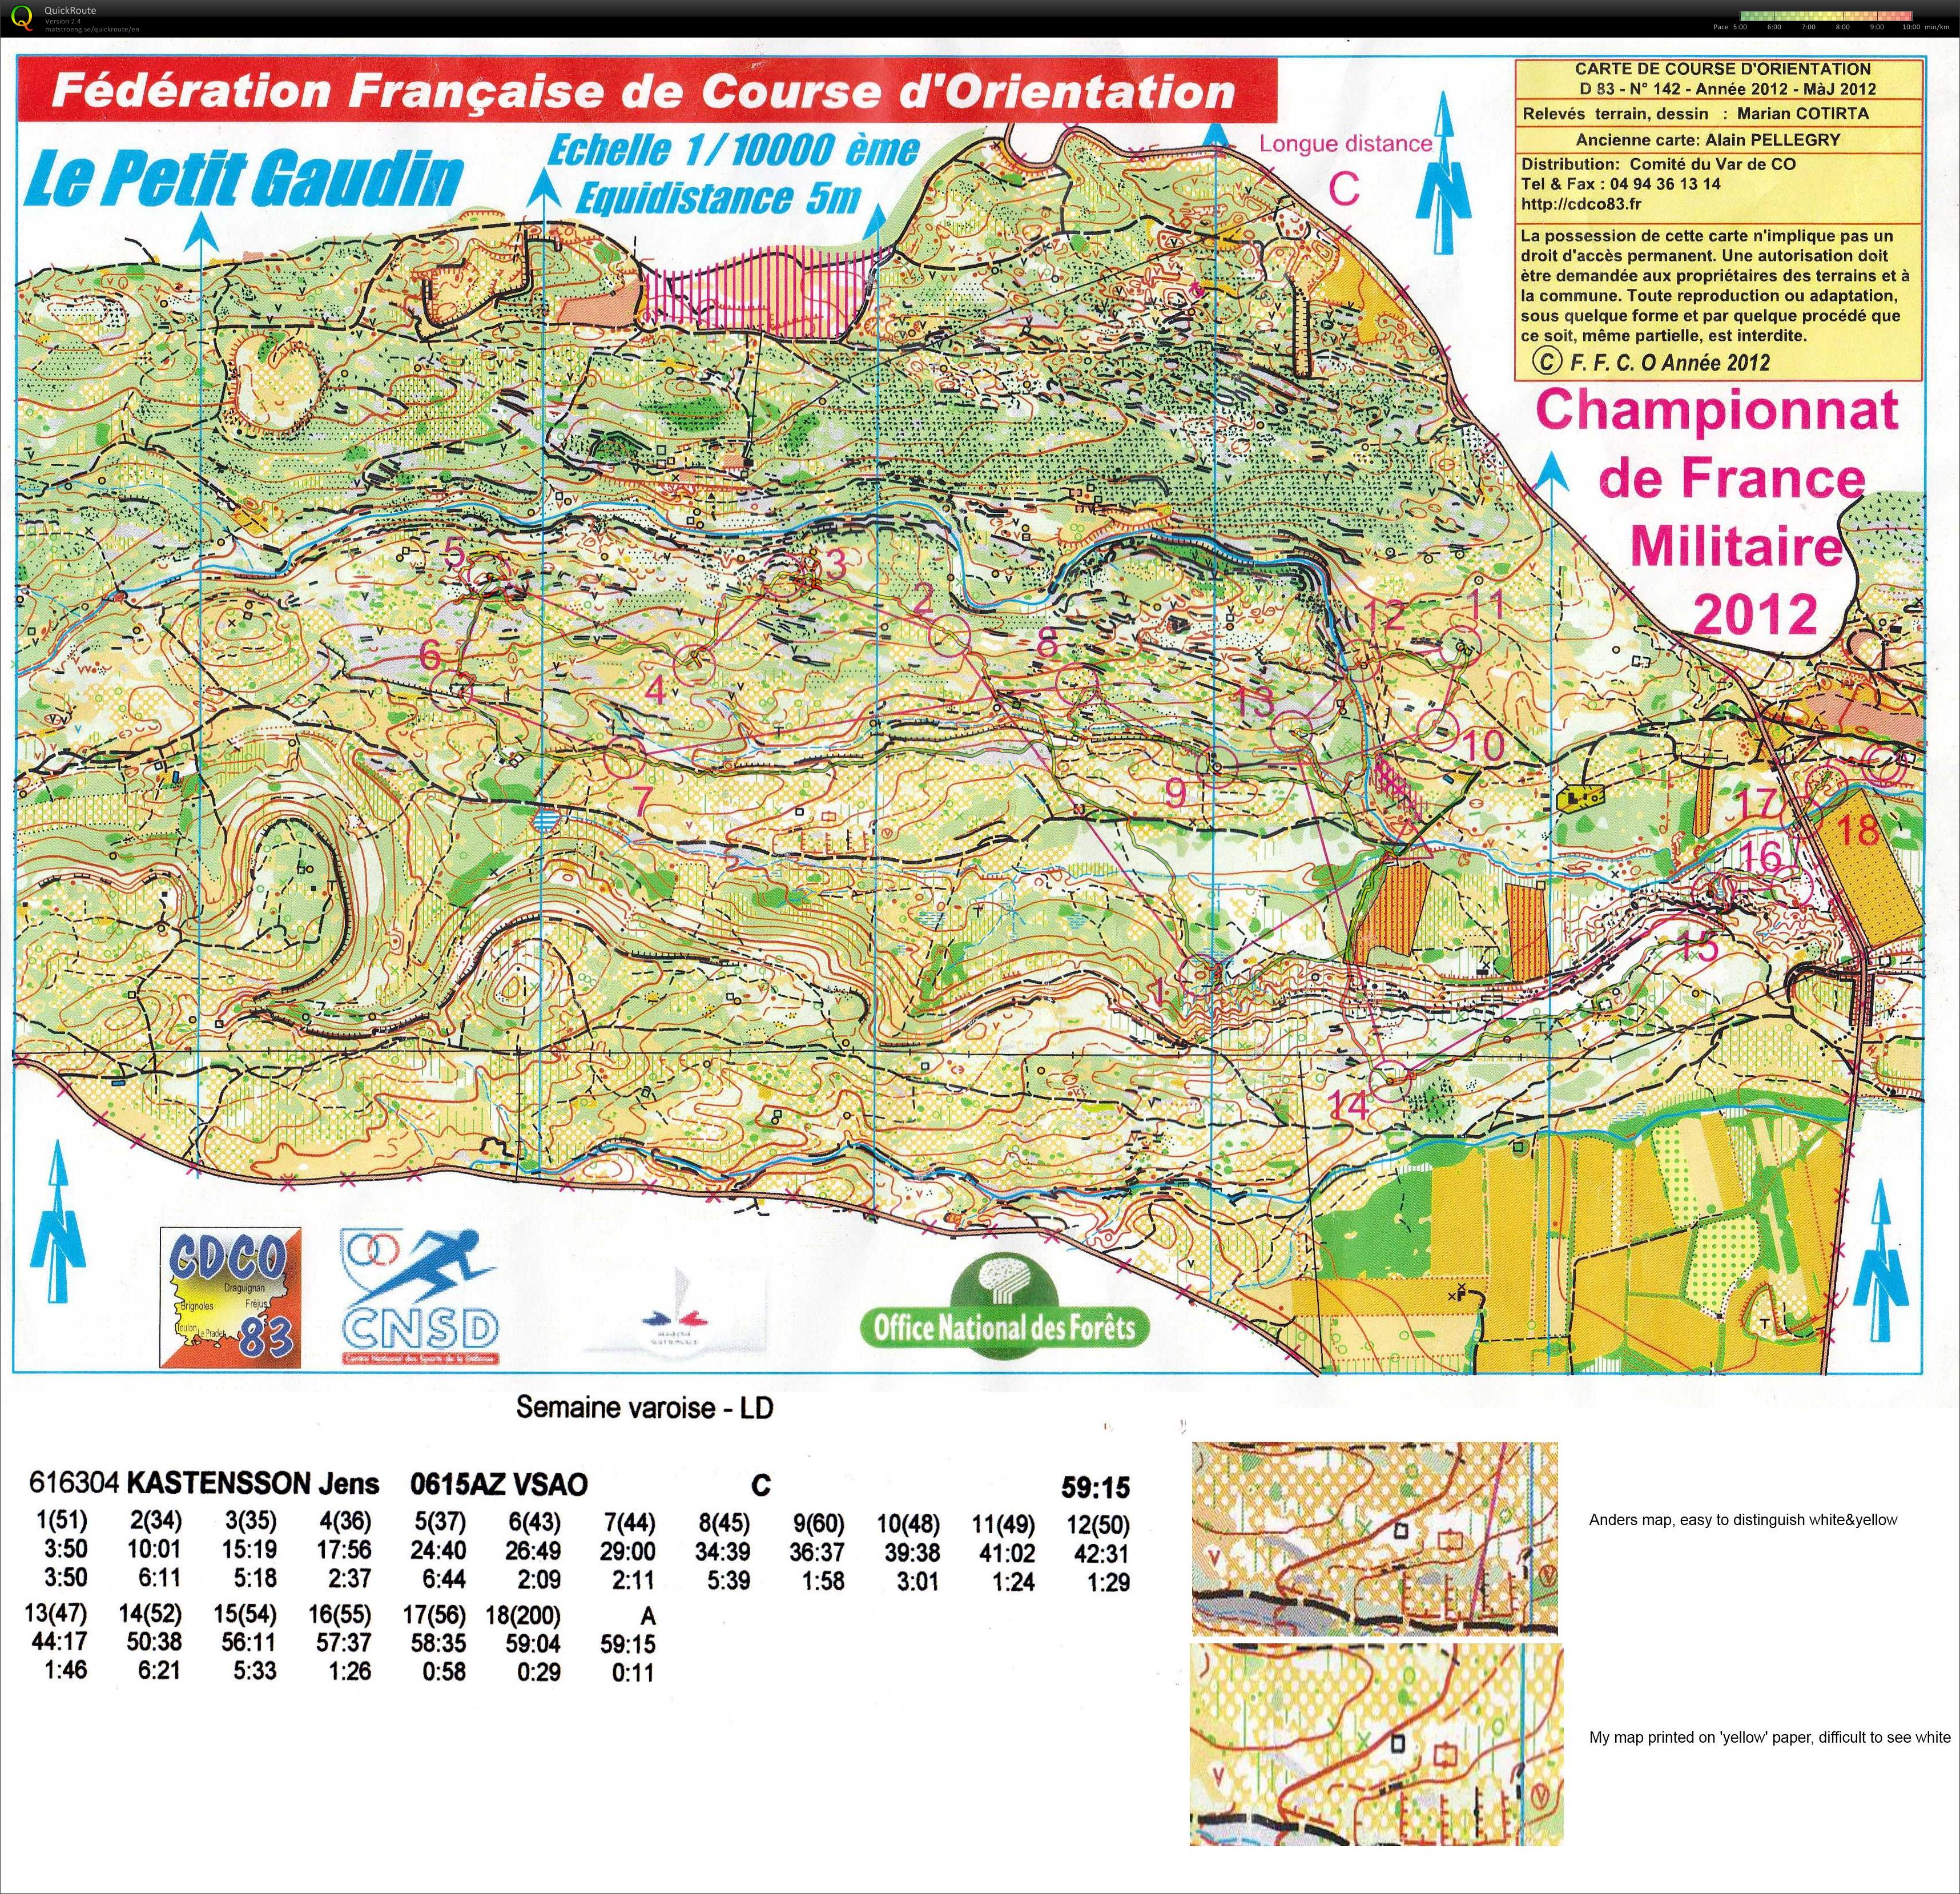 Open race after French Military long distance champs H50 (11.05.2012)